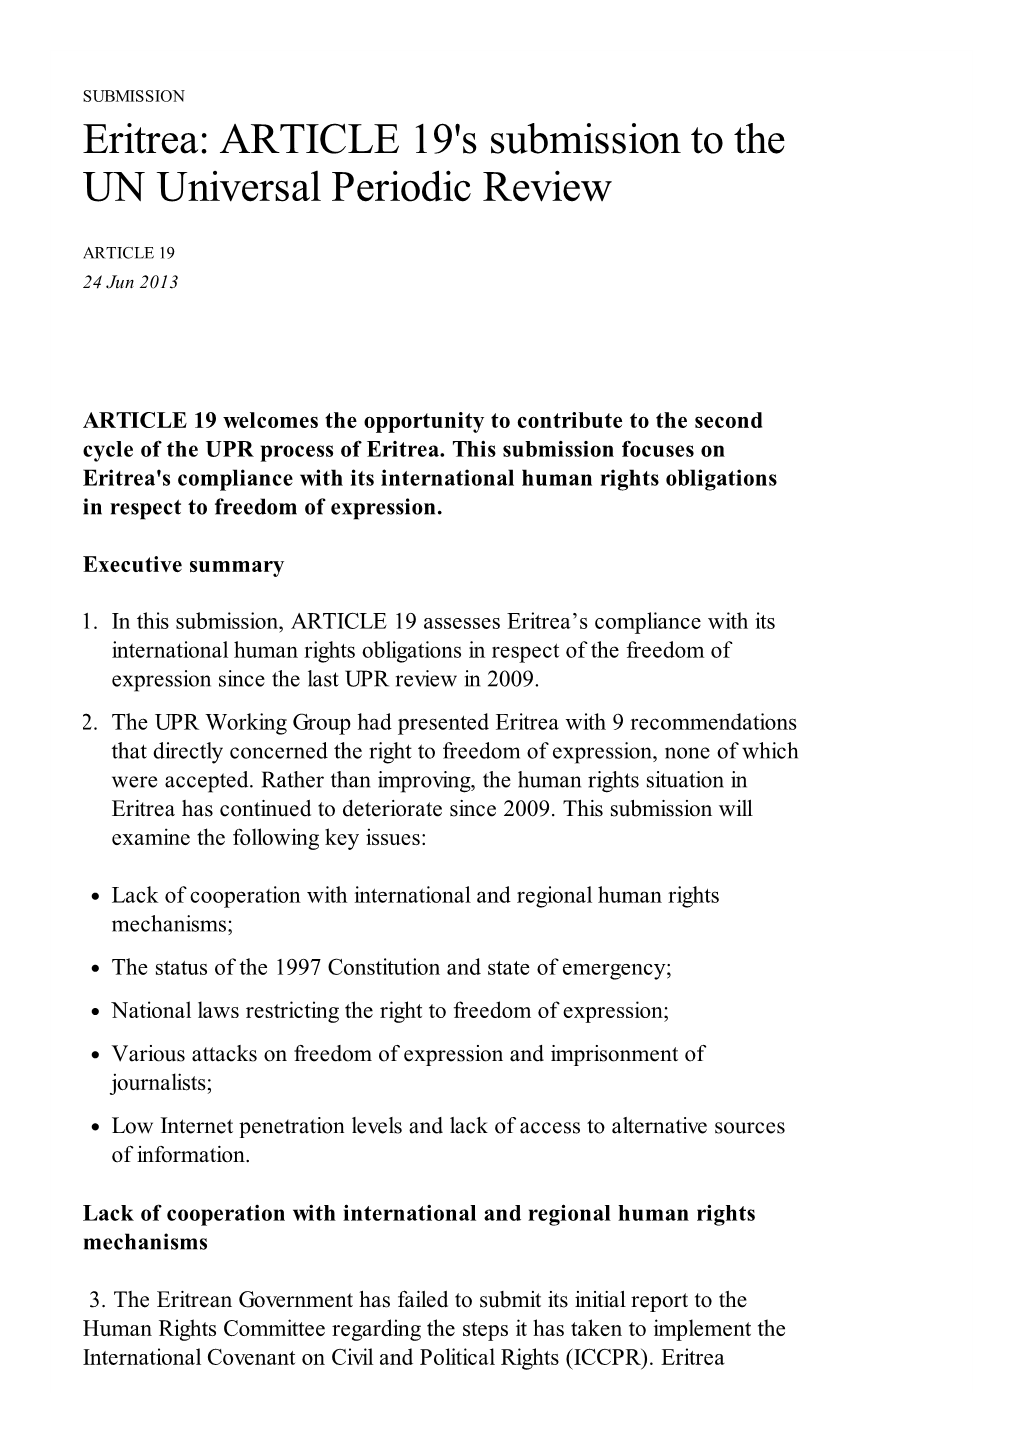 Eritrea: ARTICLE 19'S Submission to the UN Universal Periodic Review